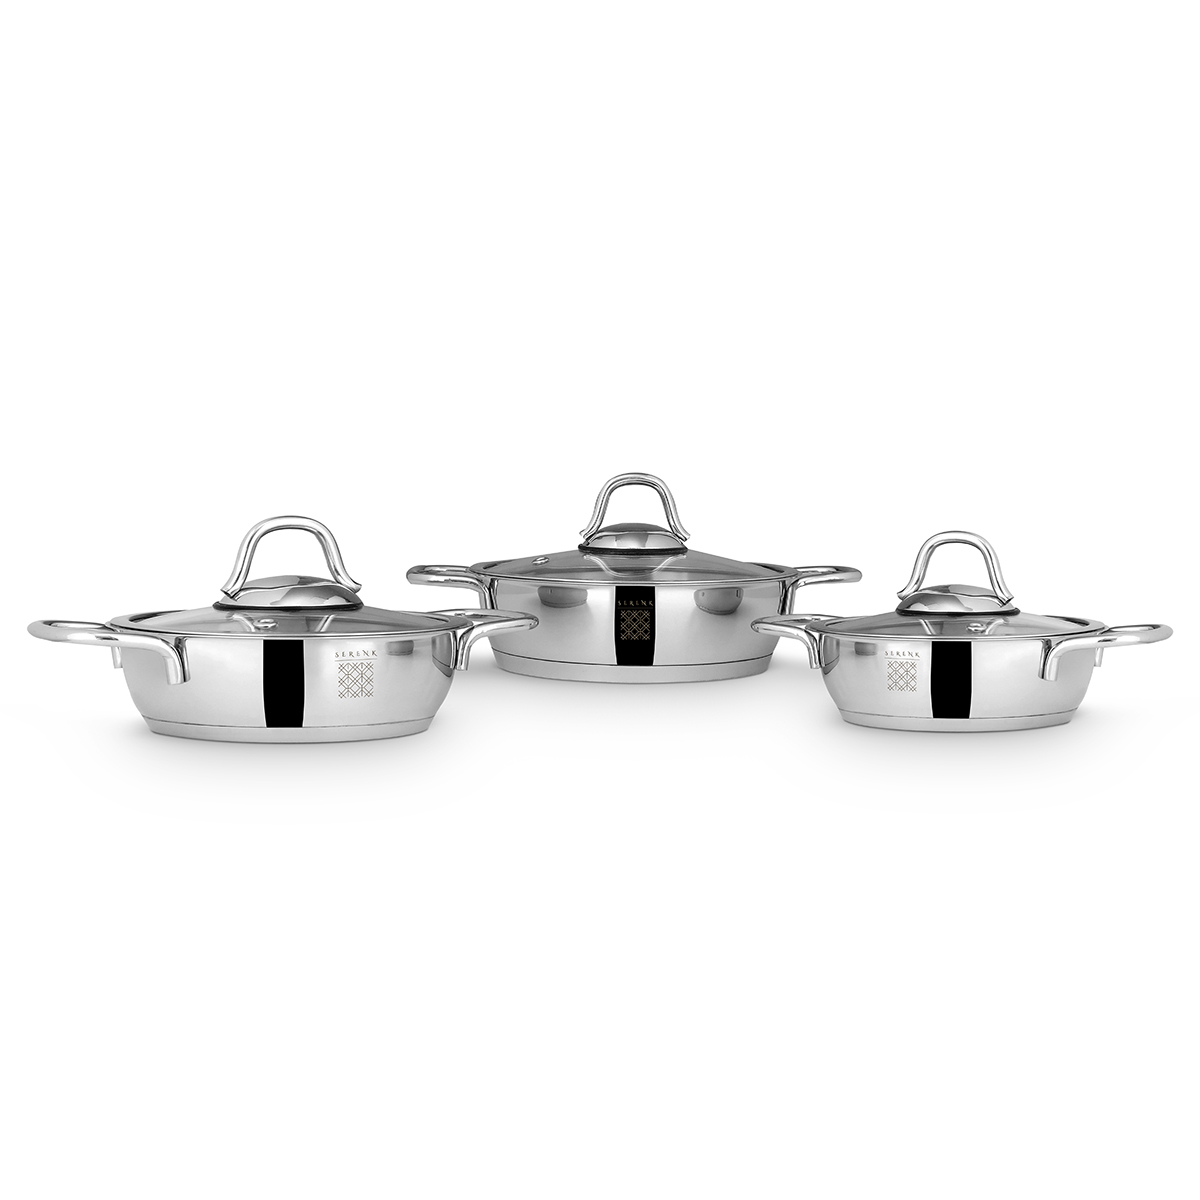 Serenk definition 6 piece stainless steel egg pan set